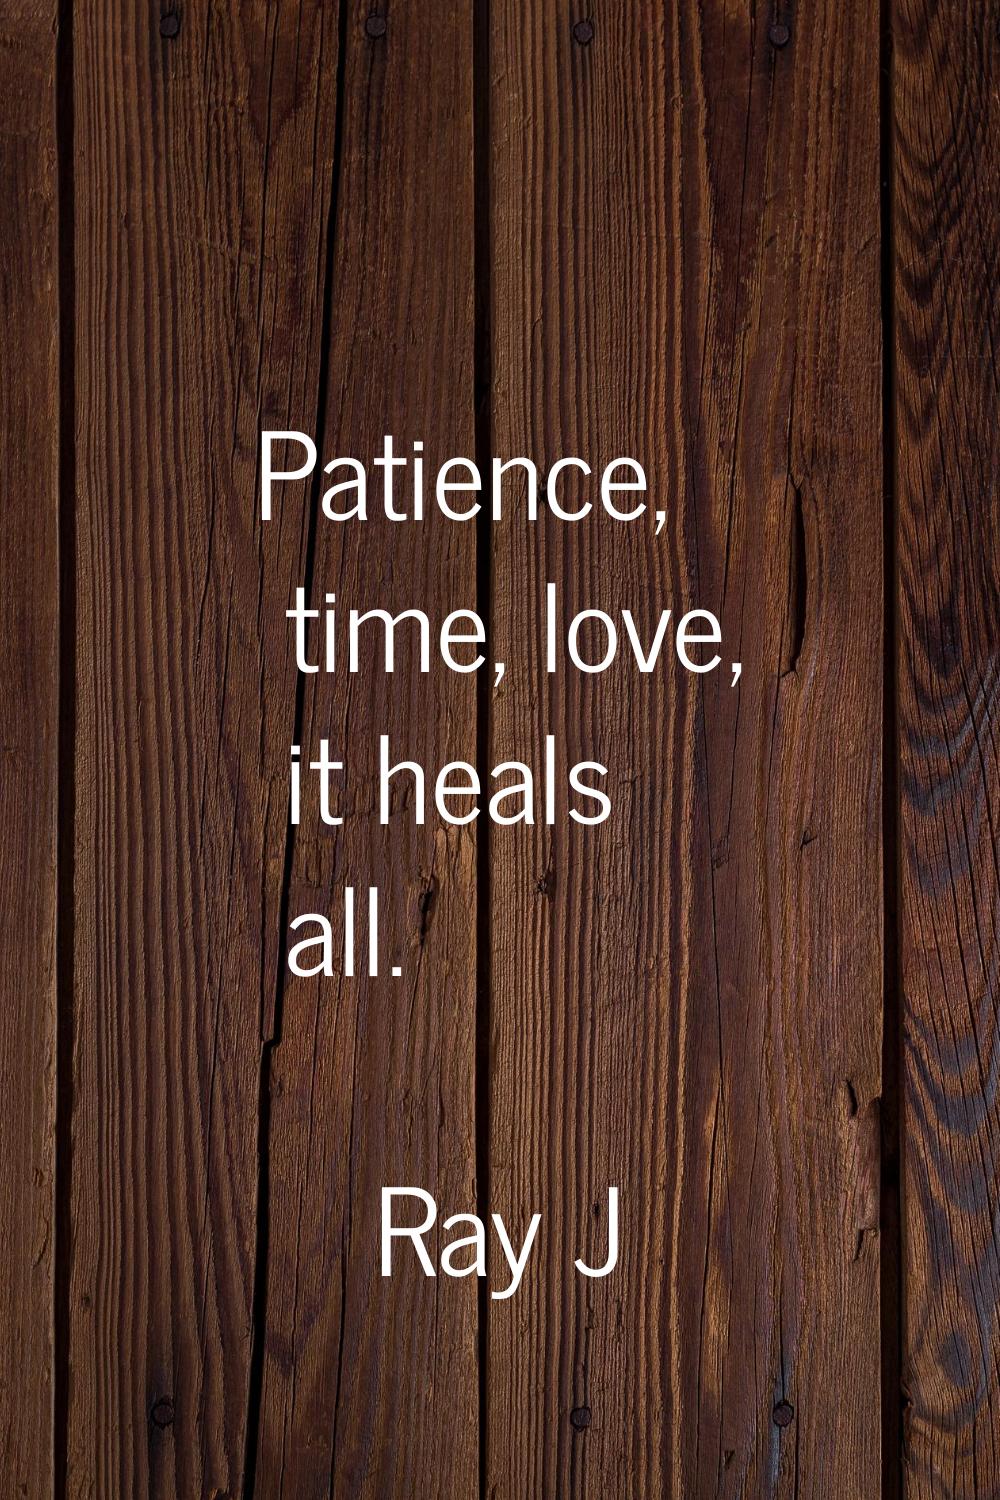 Patience, time, love, it heals all.